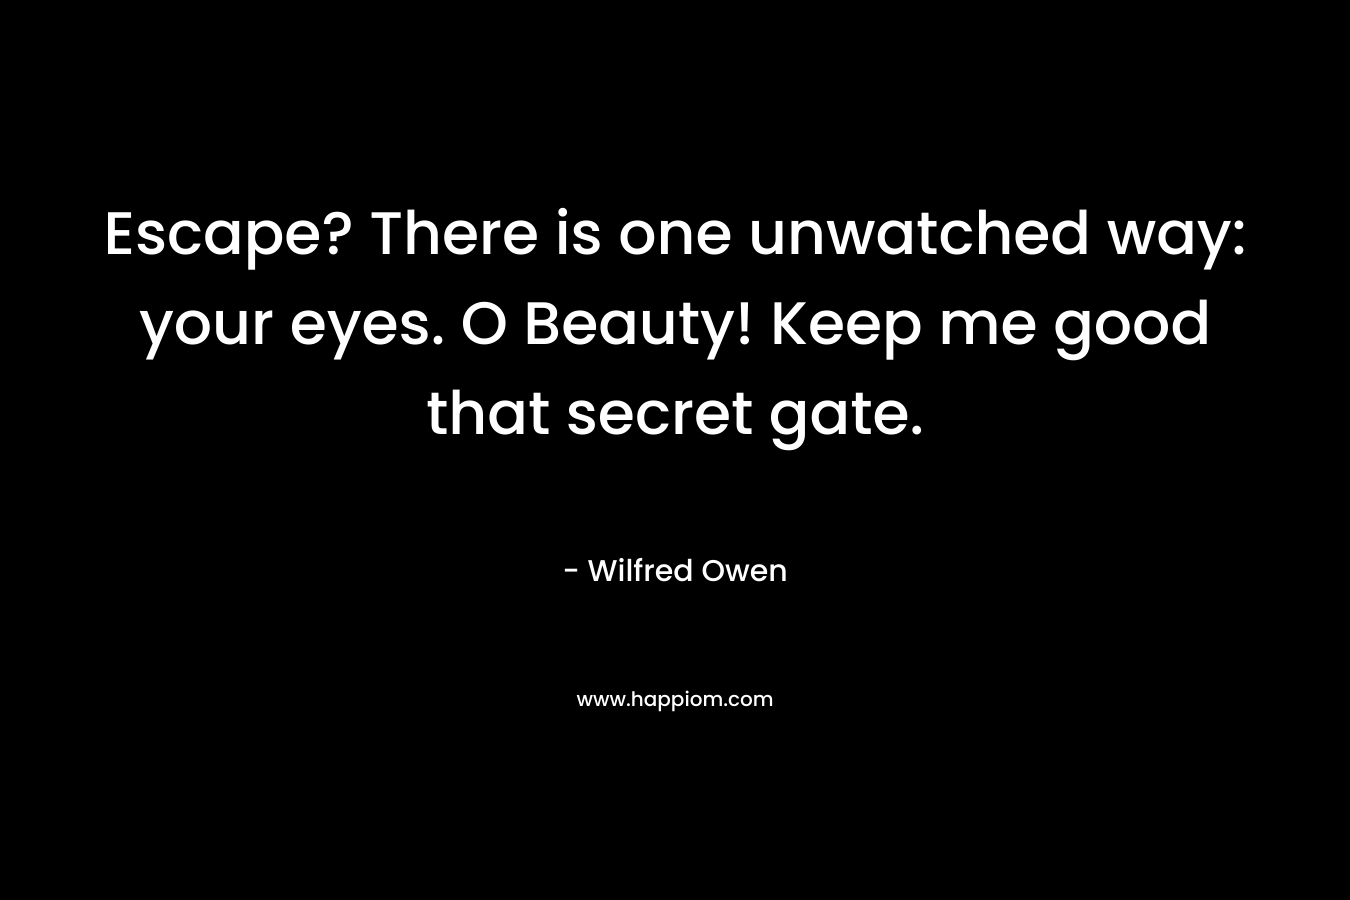 Escape? There is one unwatched way: your eyes. O Beauty! Keep me good that secret gate. – Wilfred Owen